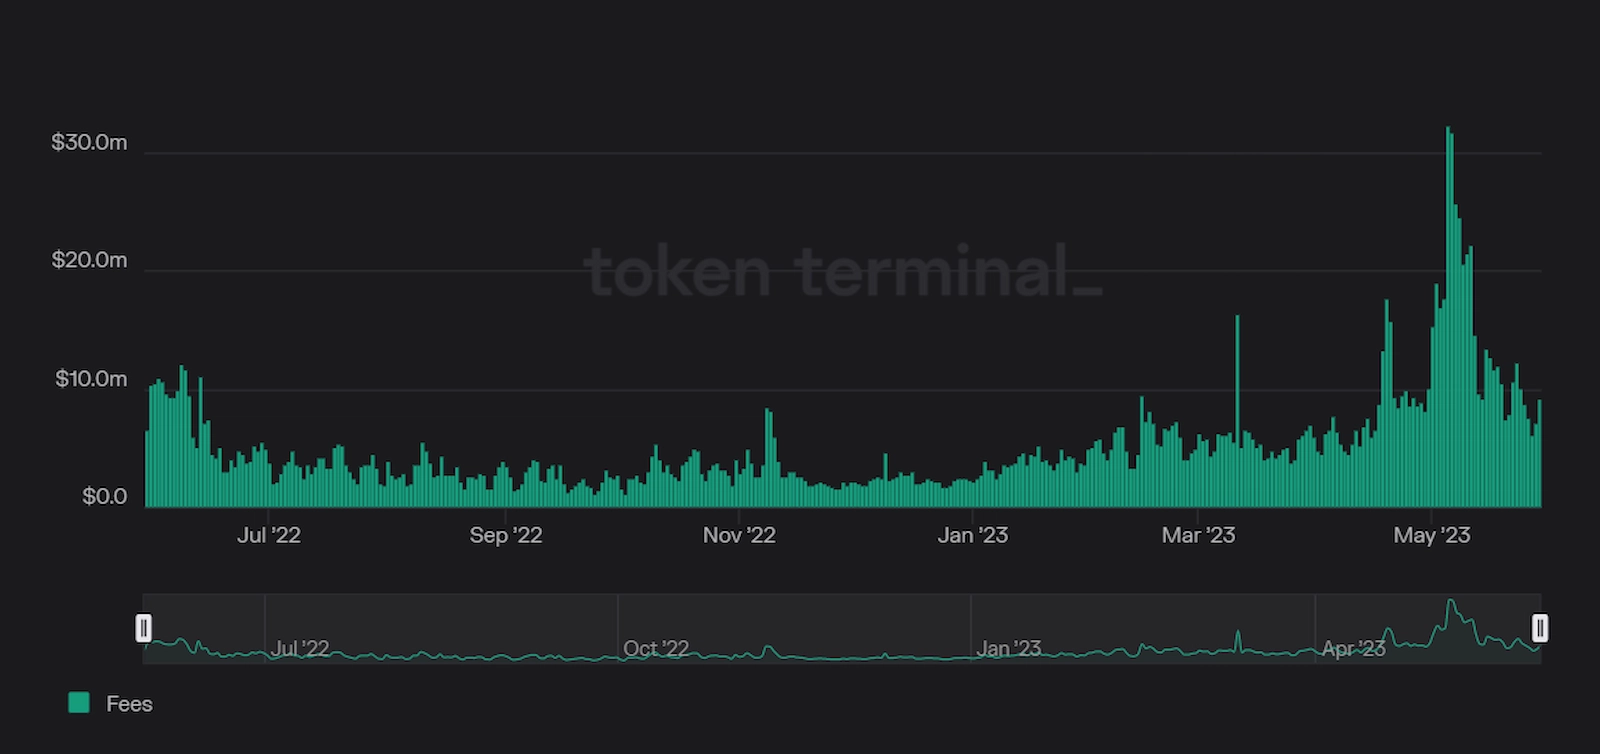 Fees on the Ethereum Network spiked during the recent memecoin frenzy